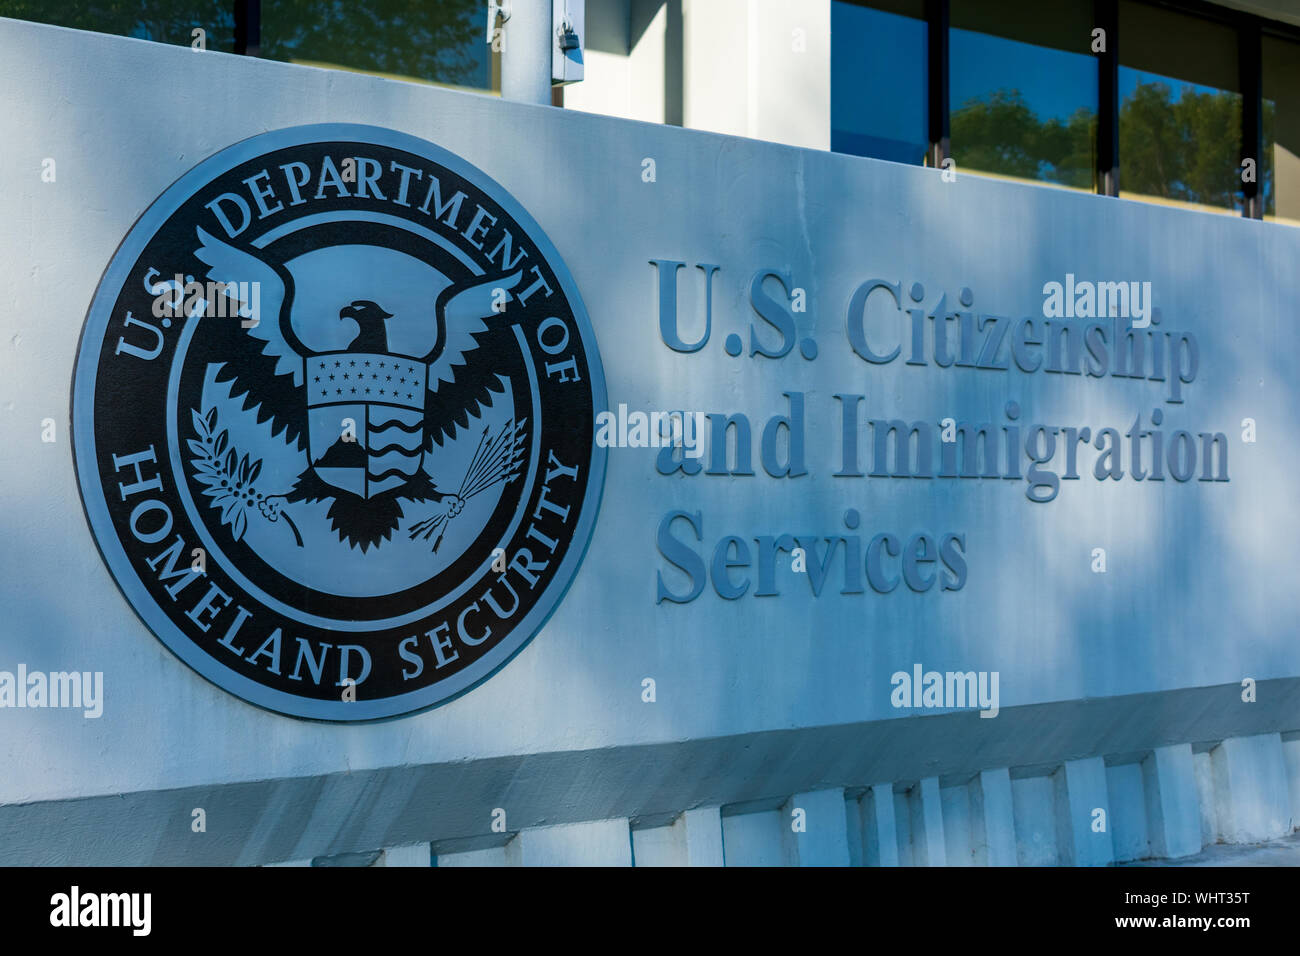 U.S. Citizenship and Immigration Services agency of the U.S. Department of Homeland Security sign near the field office Stock Photo